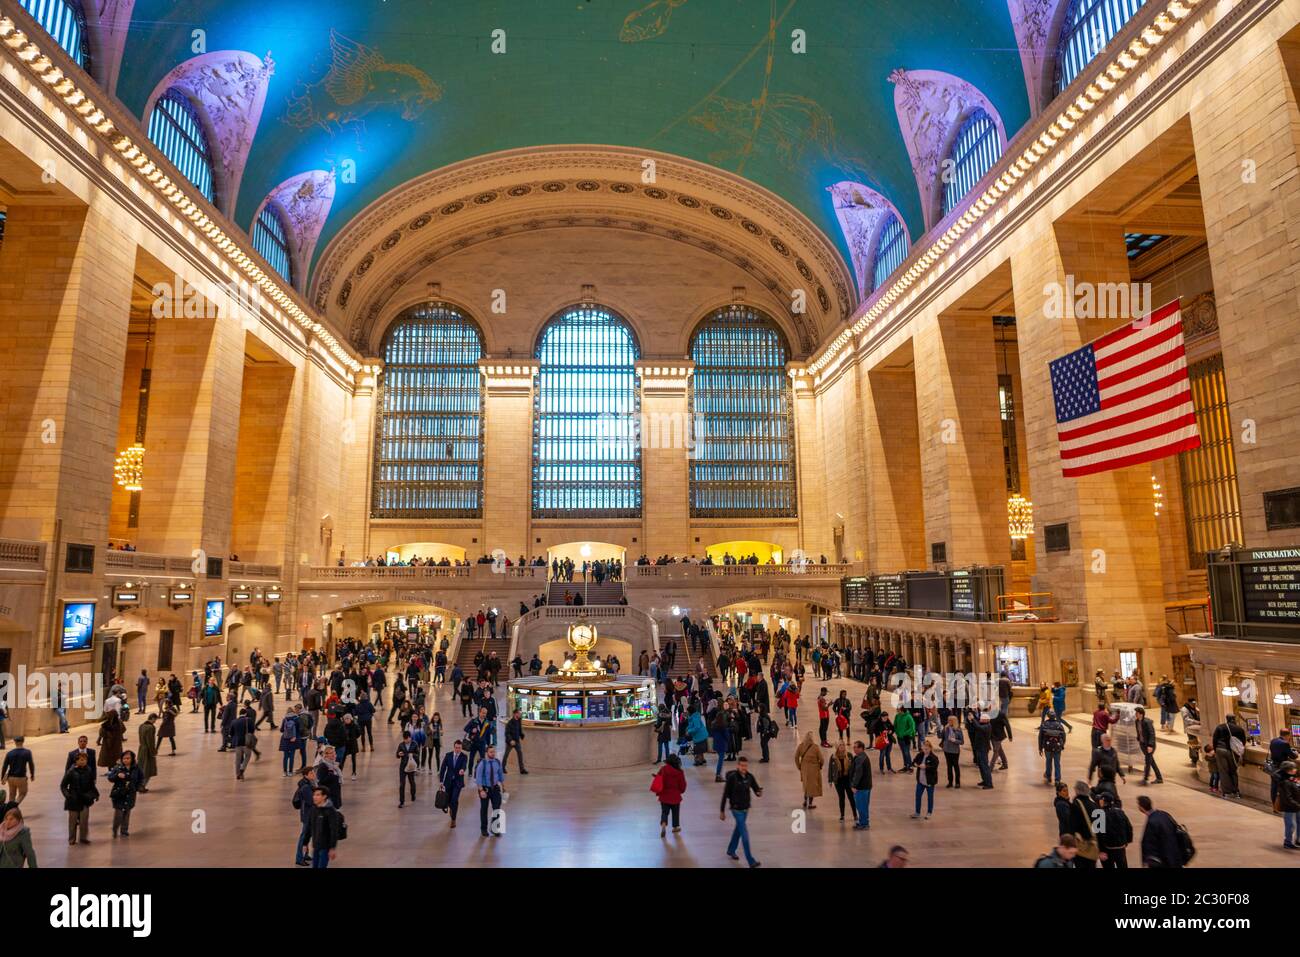 Interior view of Grand Central Station, Grand Central Terminal, Manhattan, New York City, New York State, USA Stock Photo